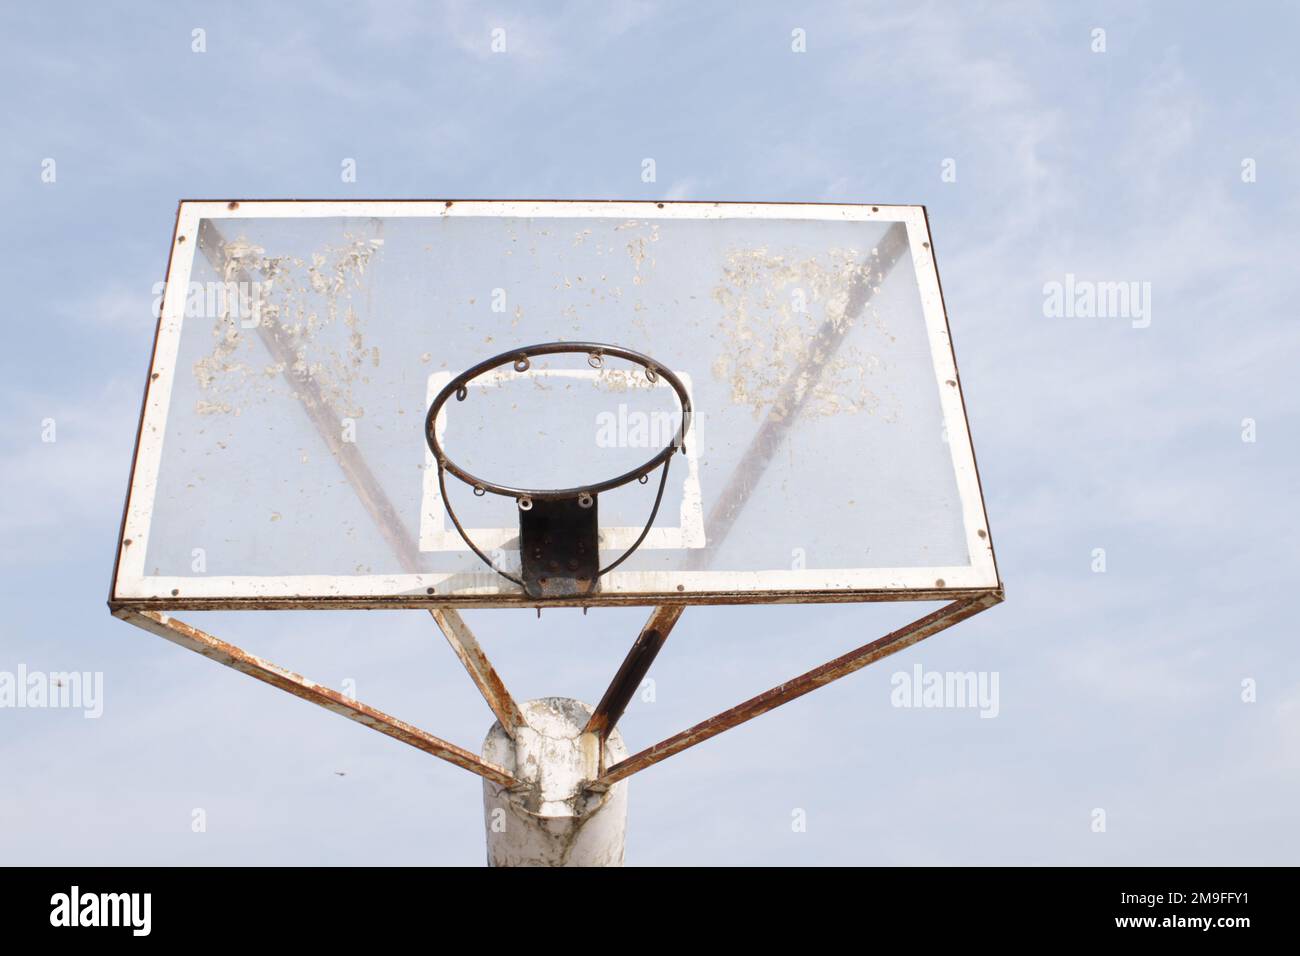 Basketball hoop on blue sky with clouds background Stock Photo